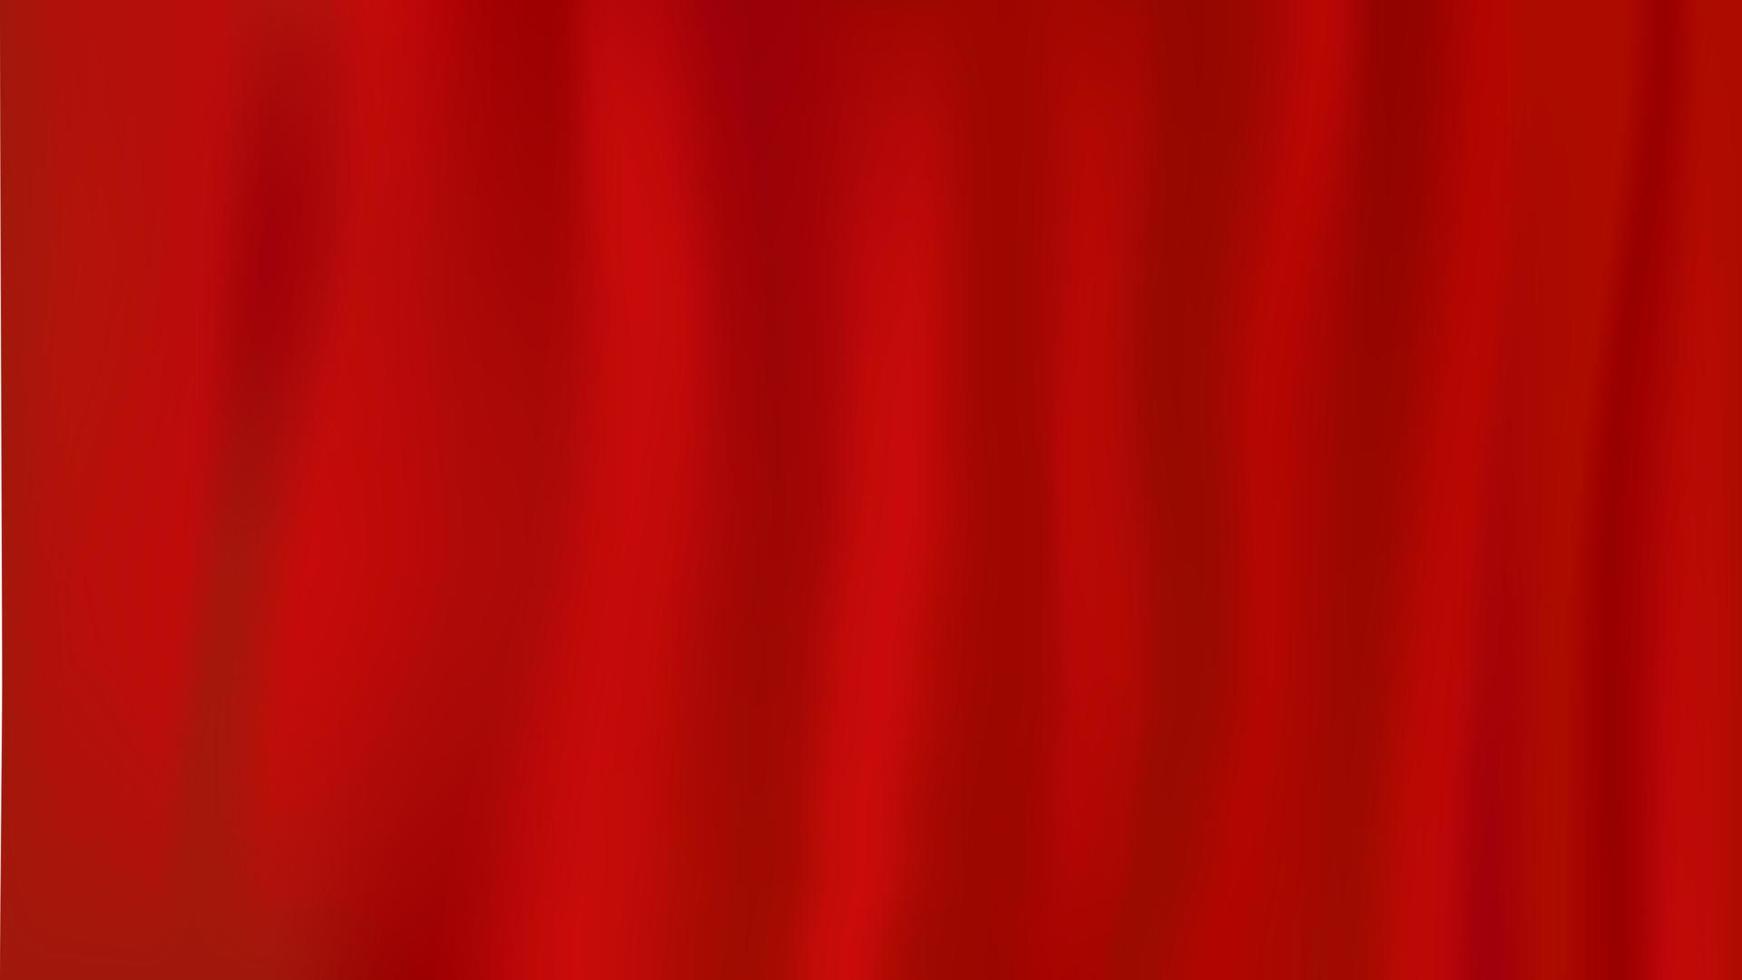 Red luxury fabric background vector banner design